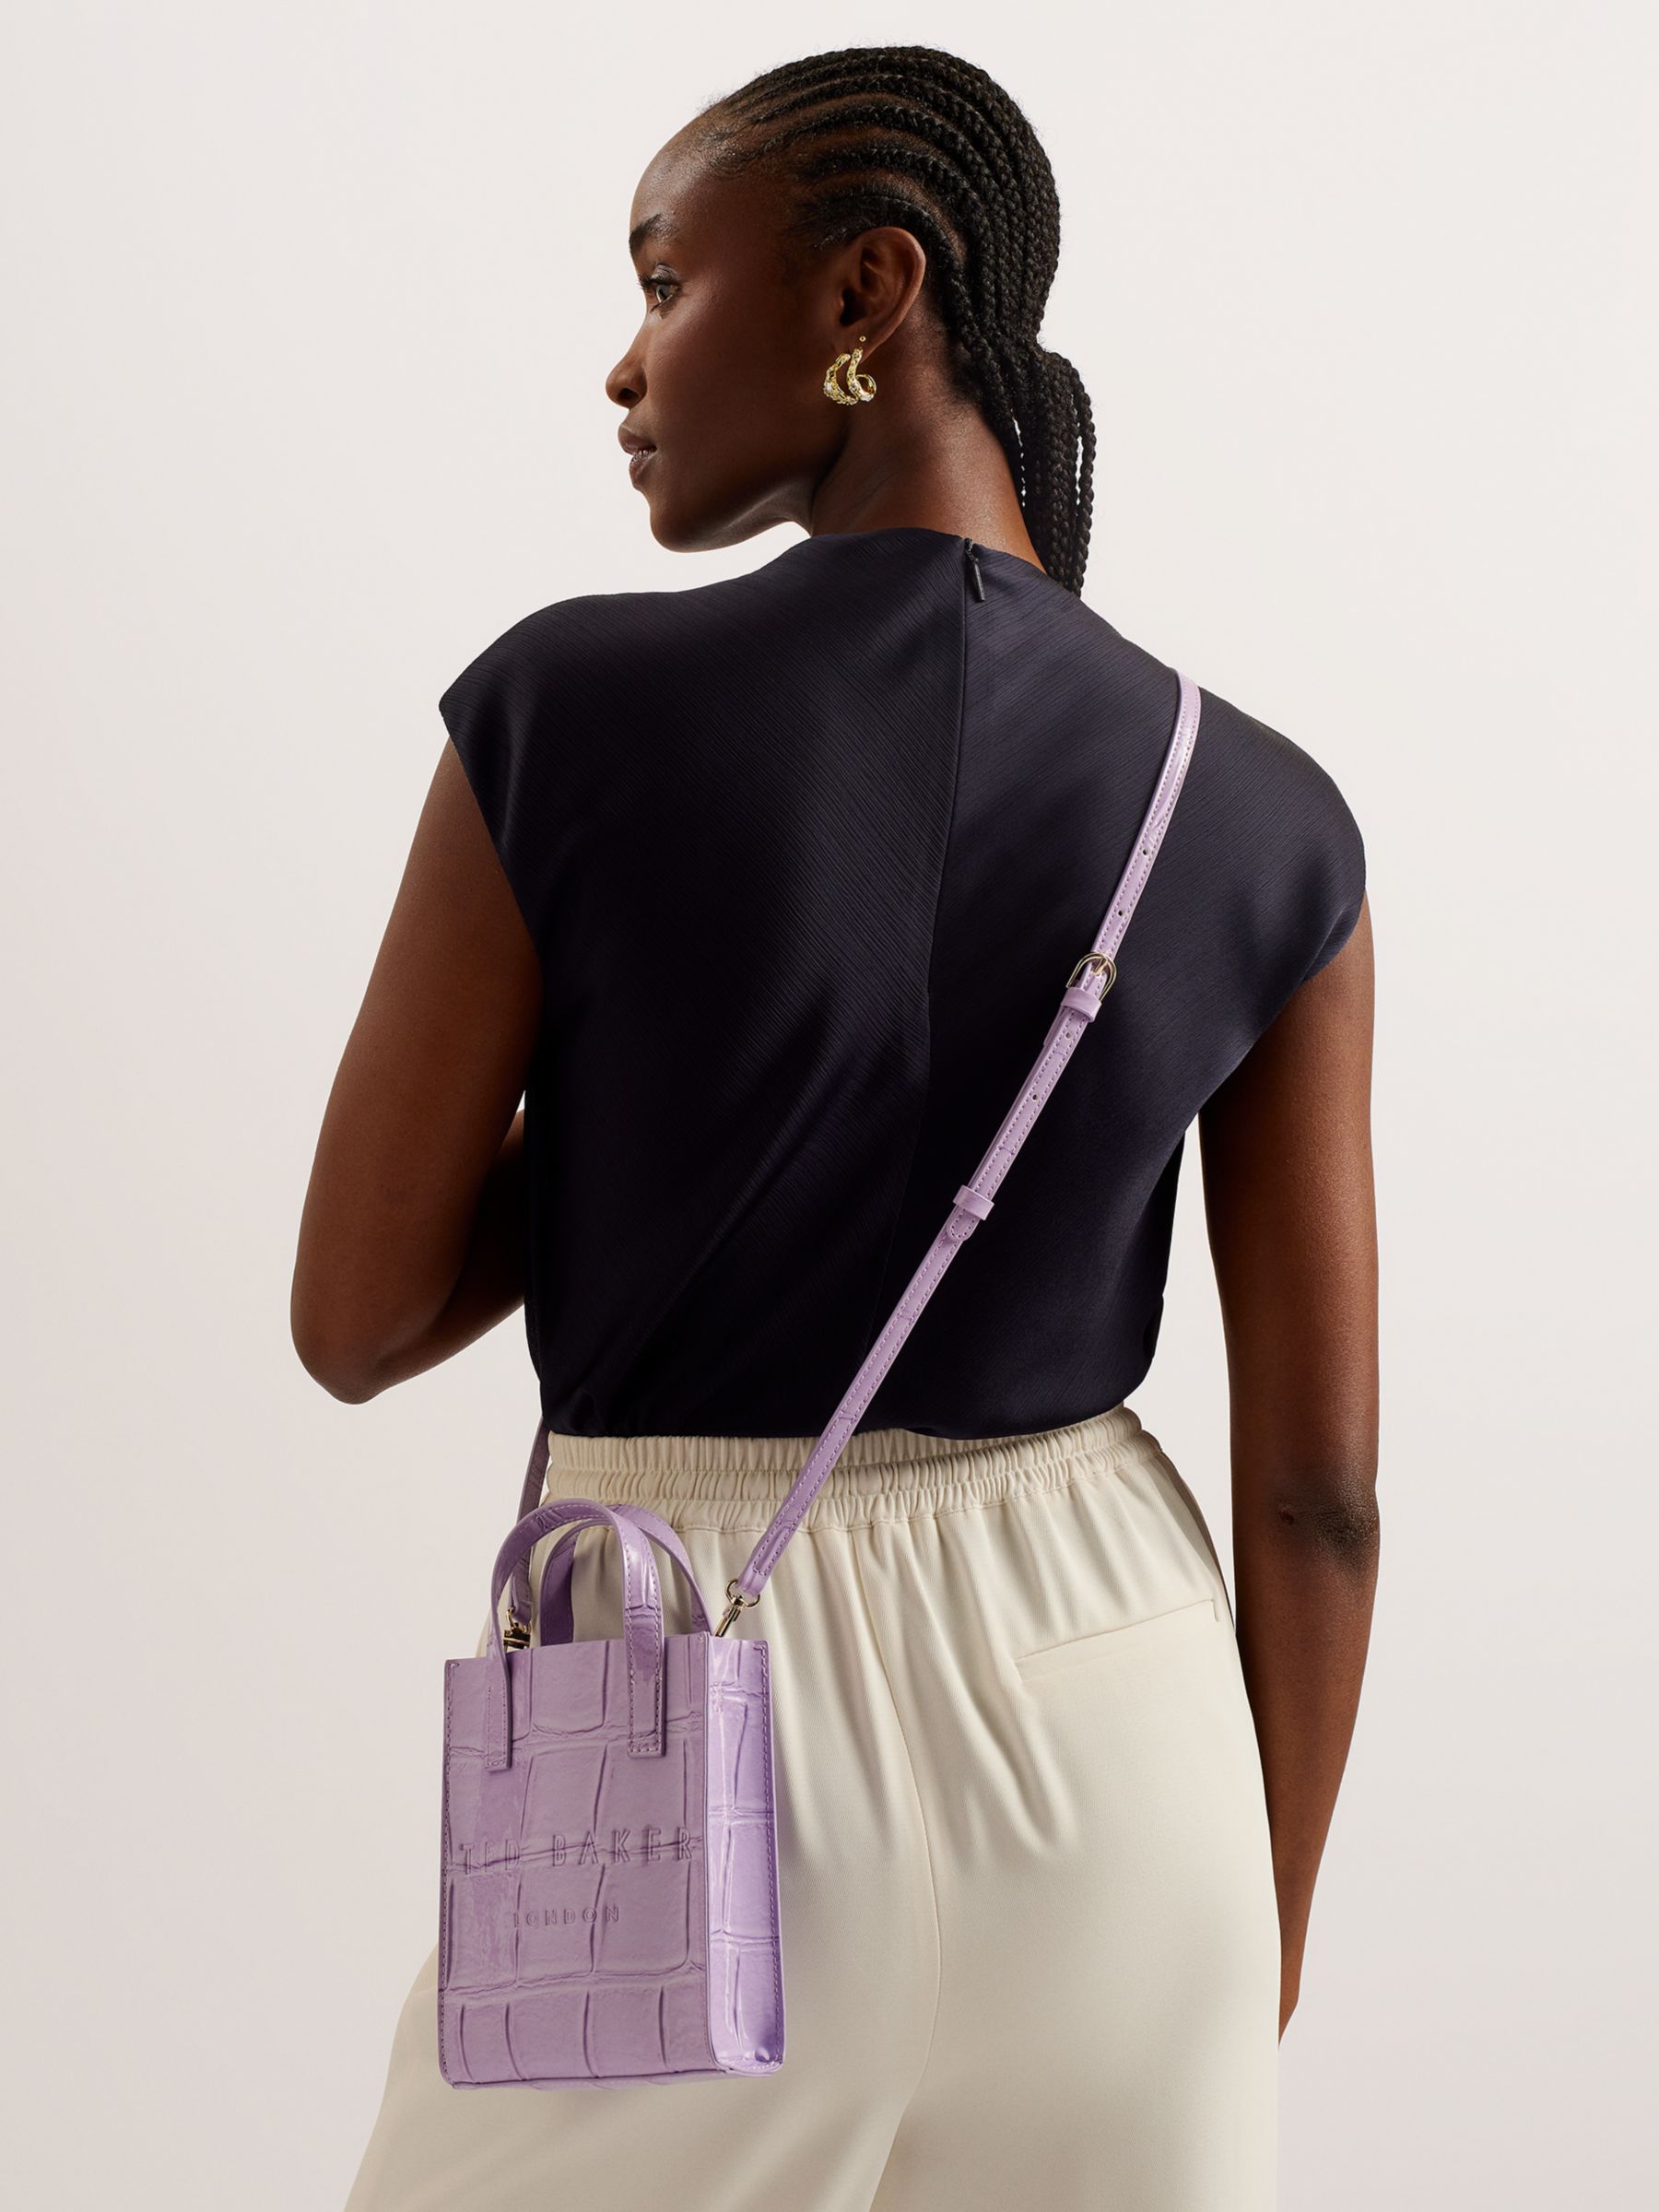 Buy Ted Baker Gatocon Croc Effect Cross Body Bag, Lilac Online at johnlewis.com